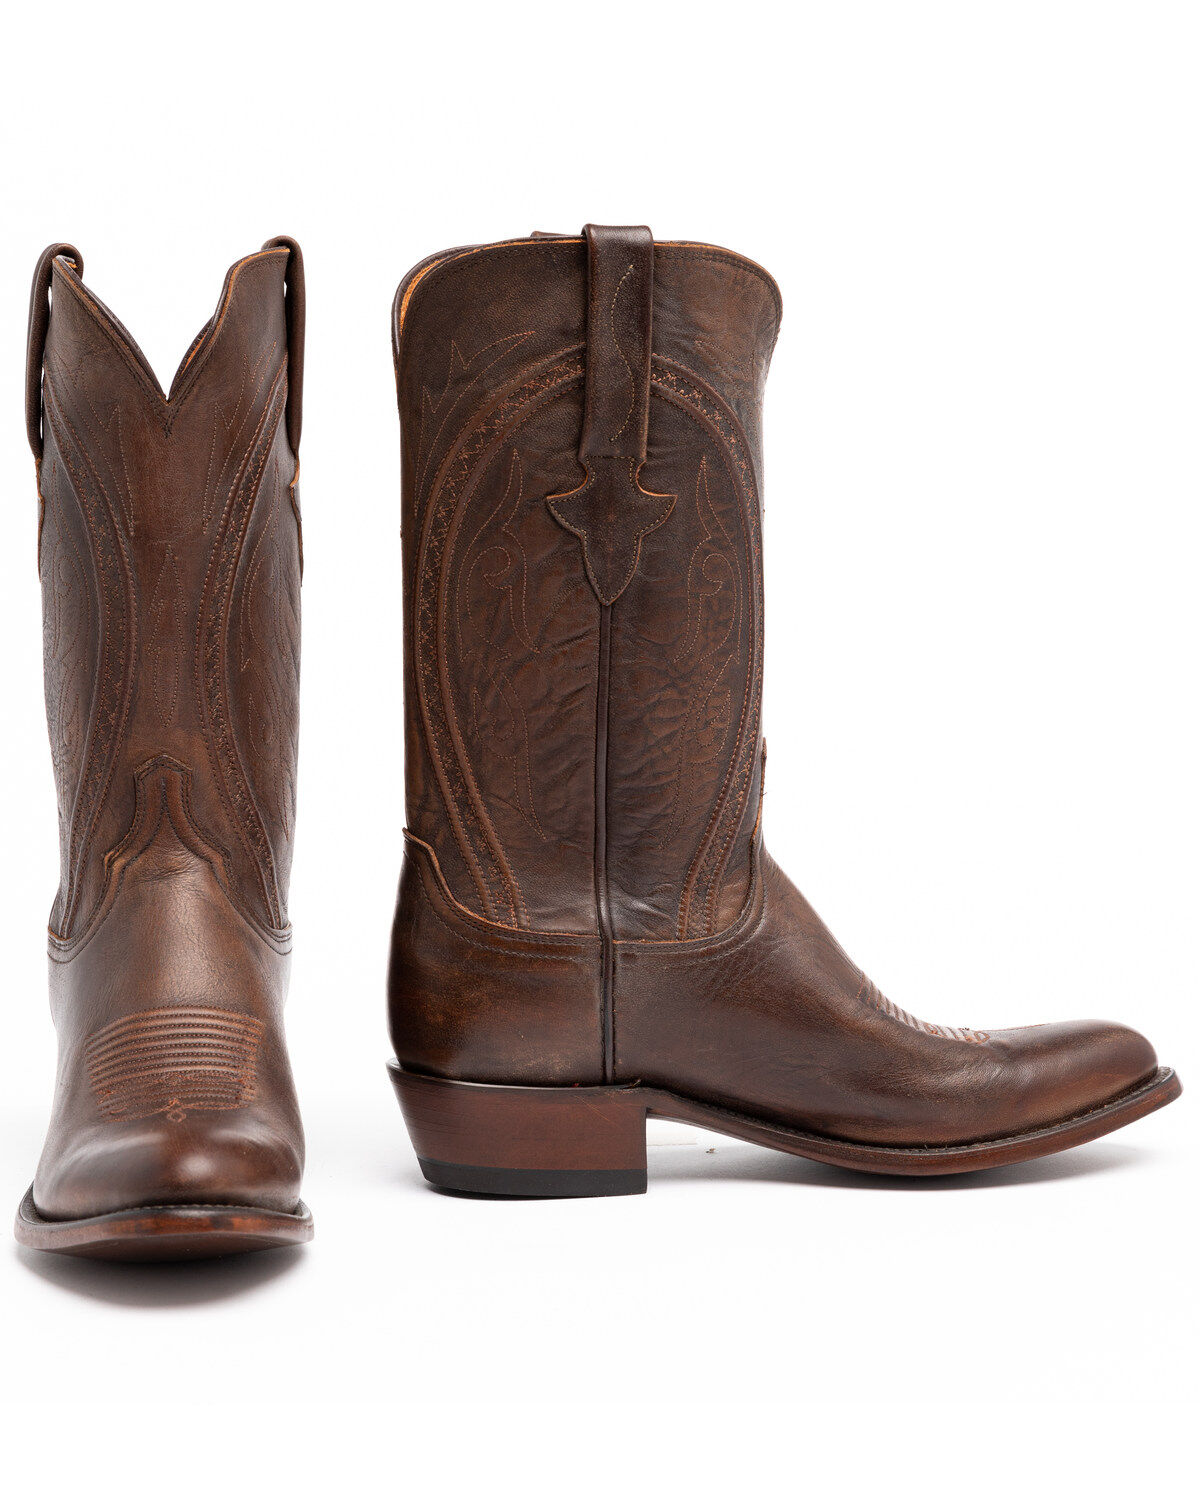 boot barn lucchese boots